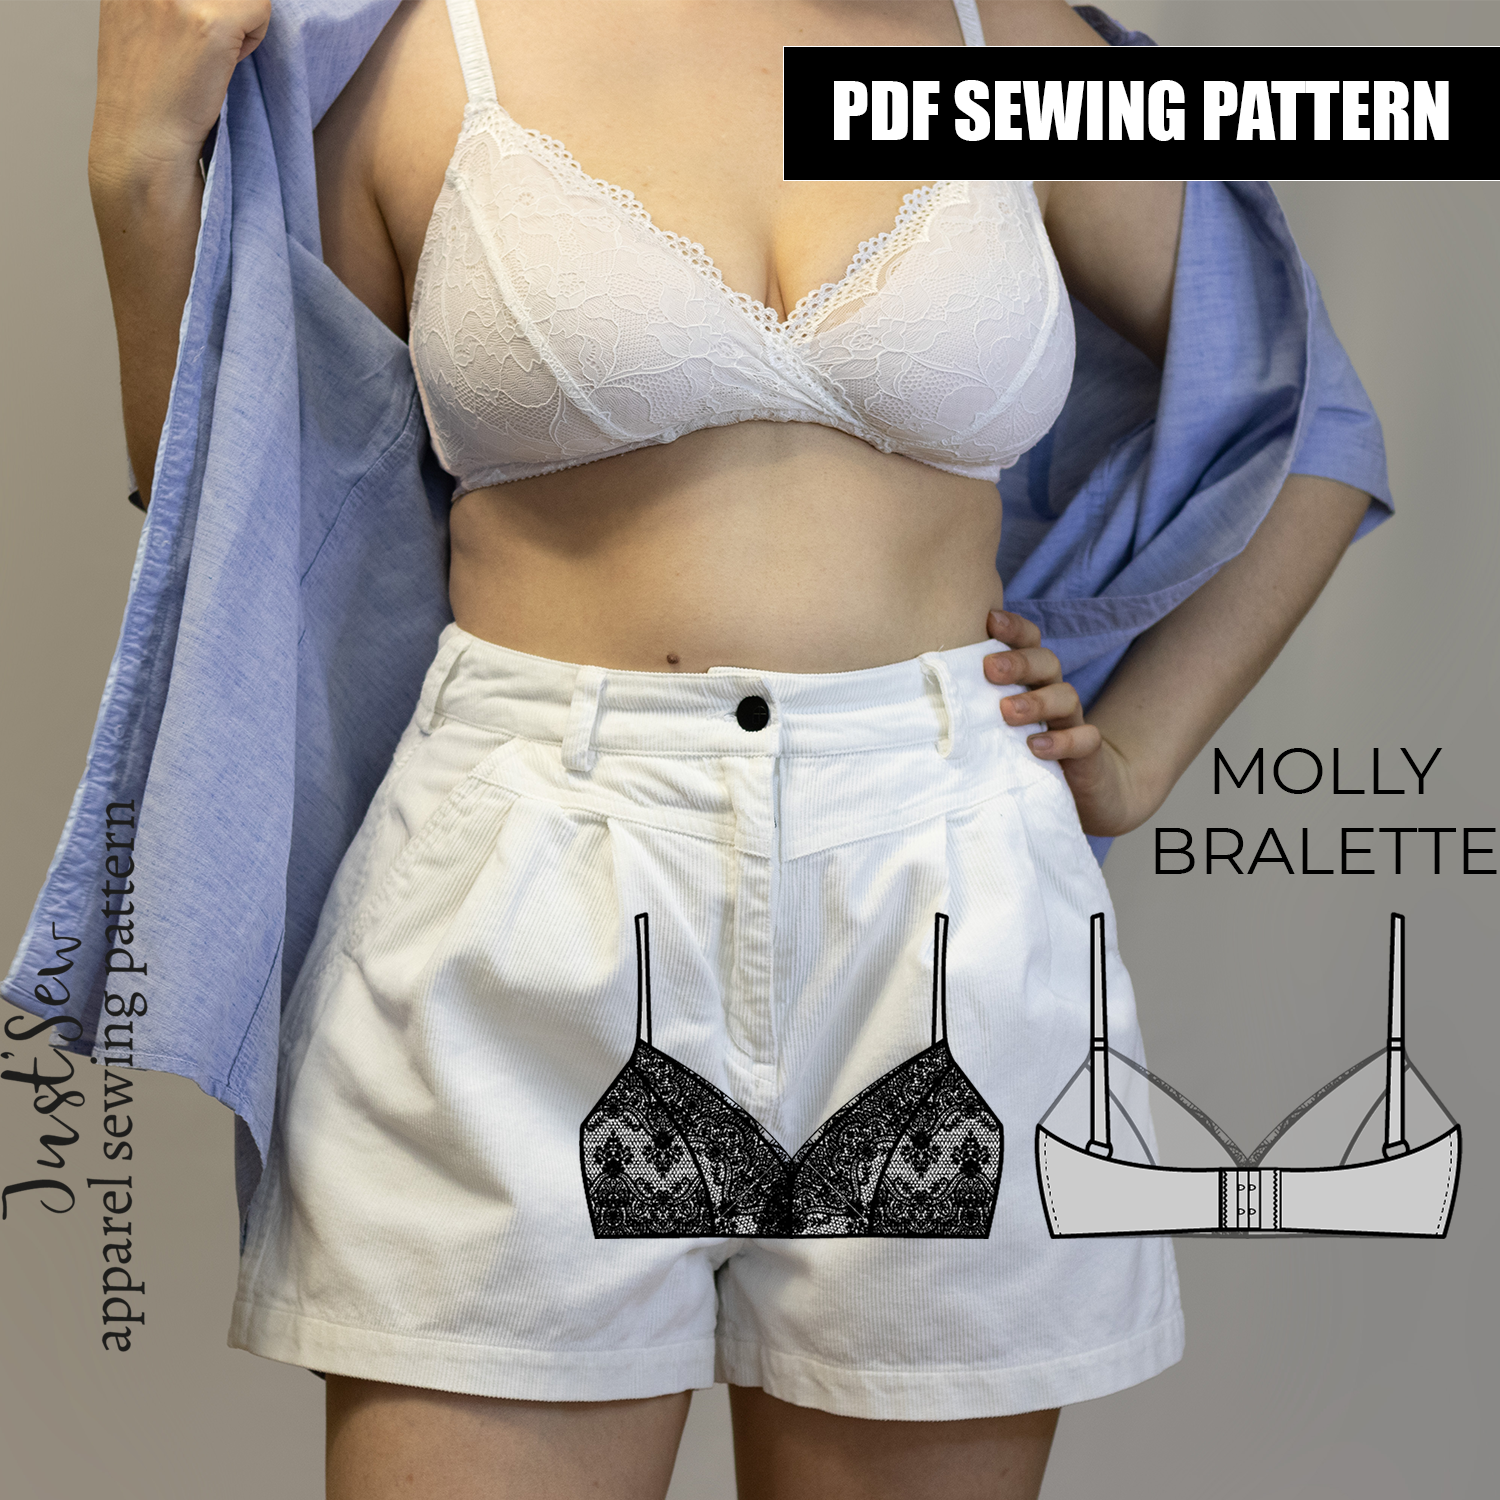 Bralette sewing pattern for women step-by-step instruction